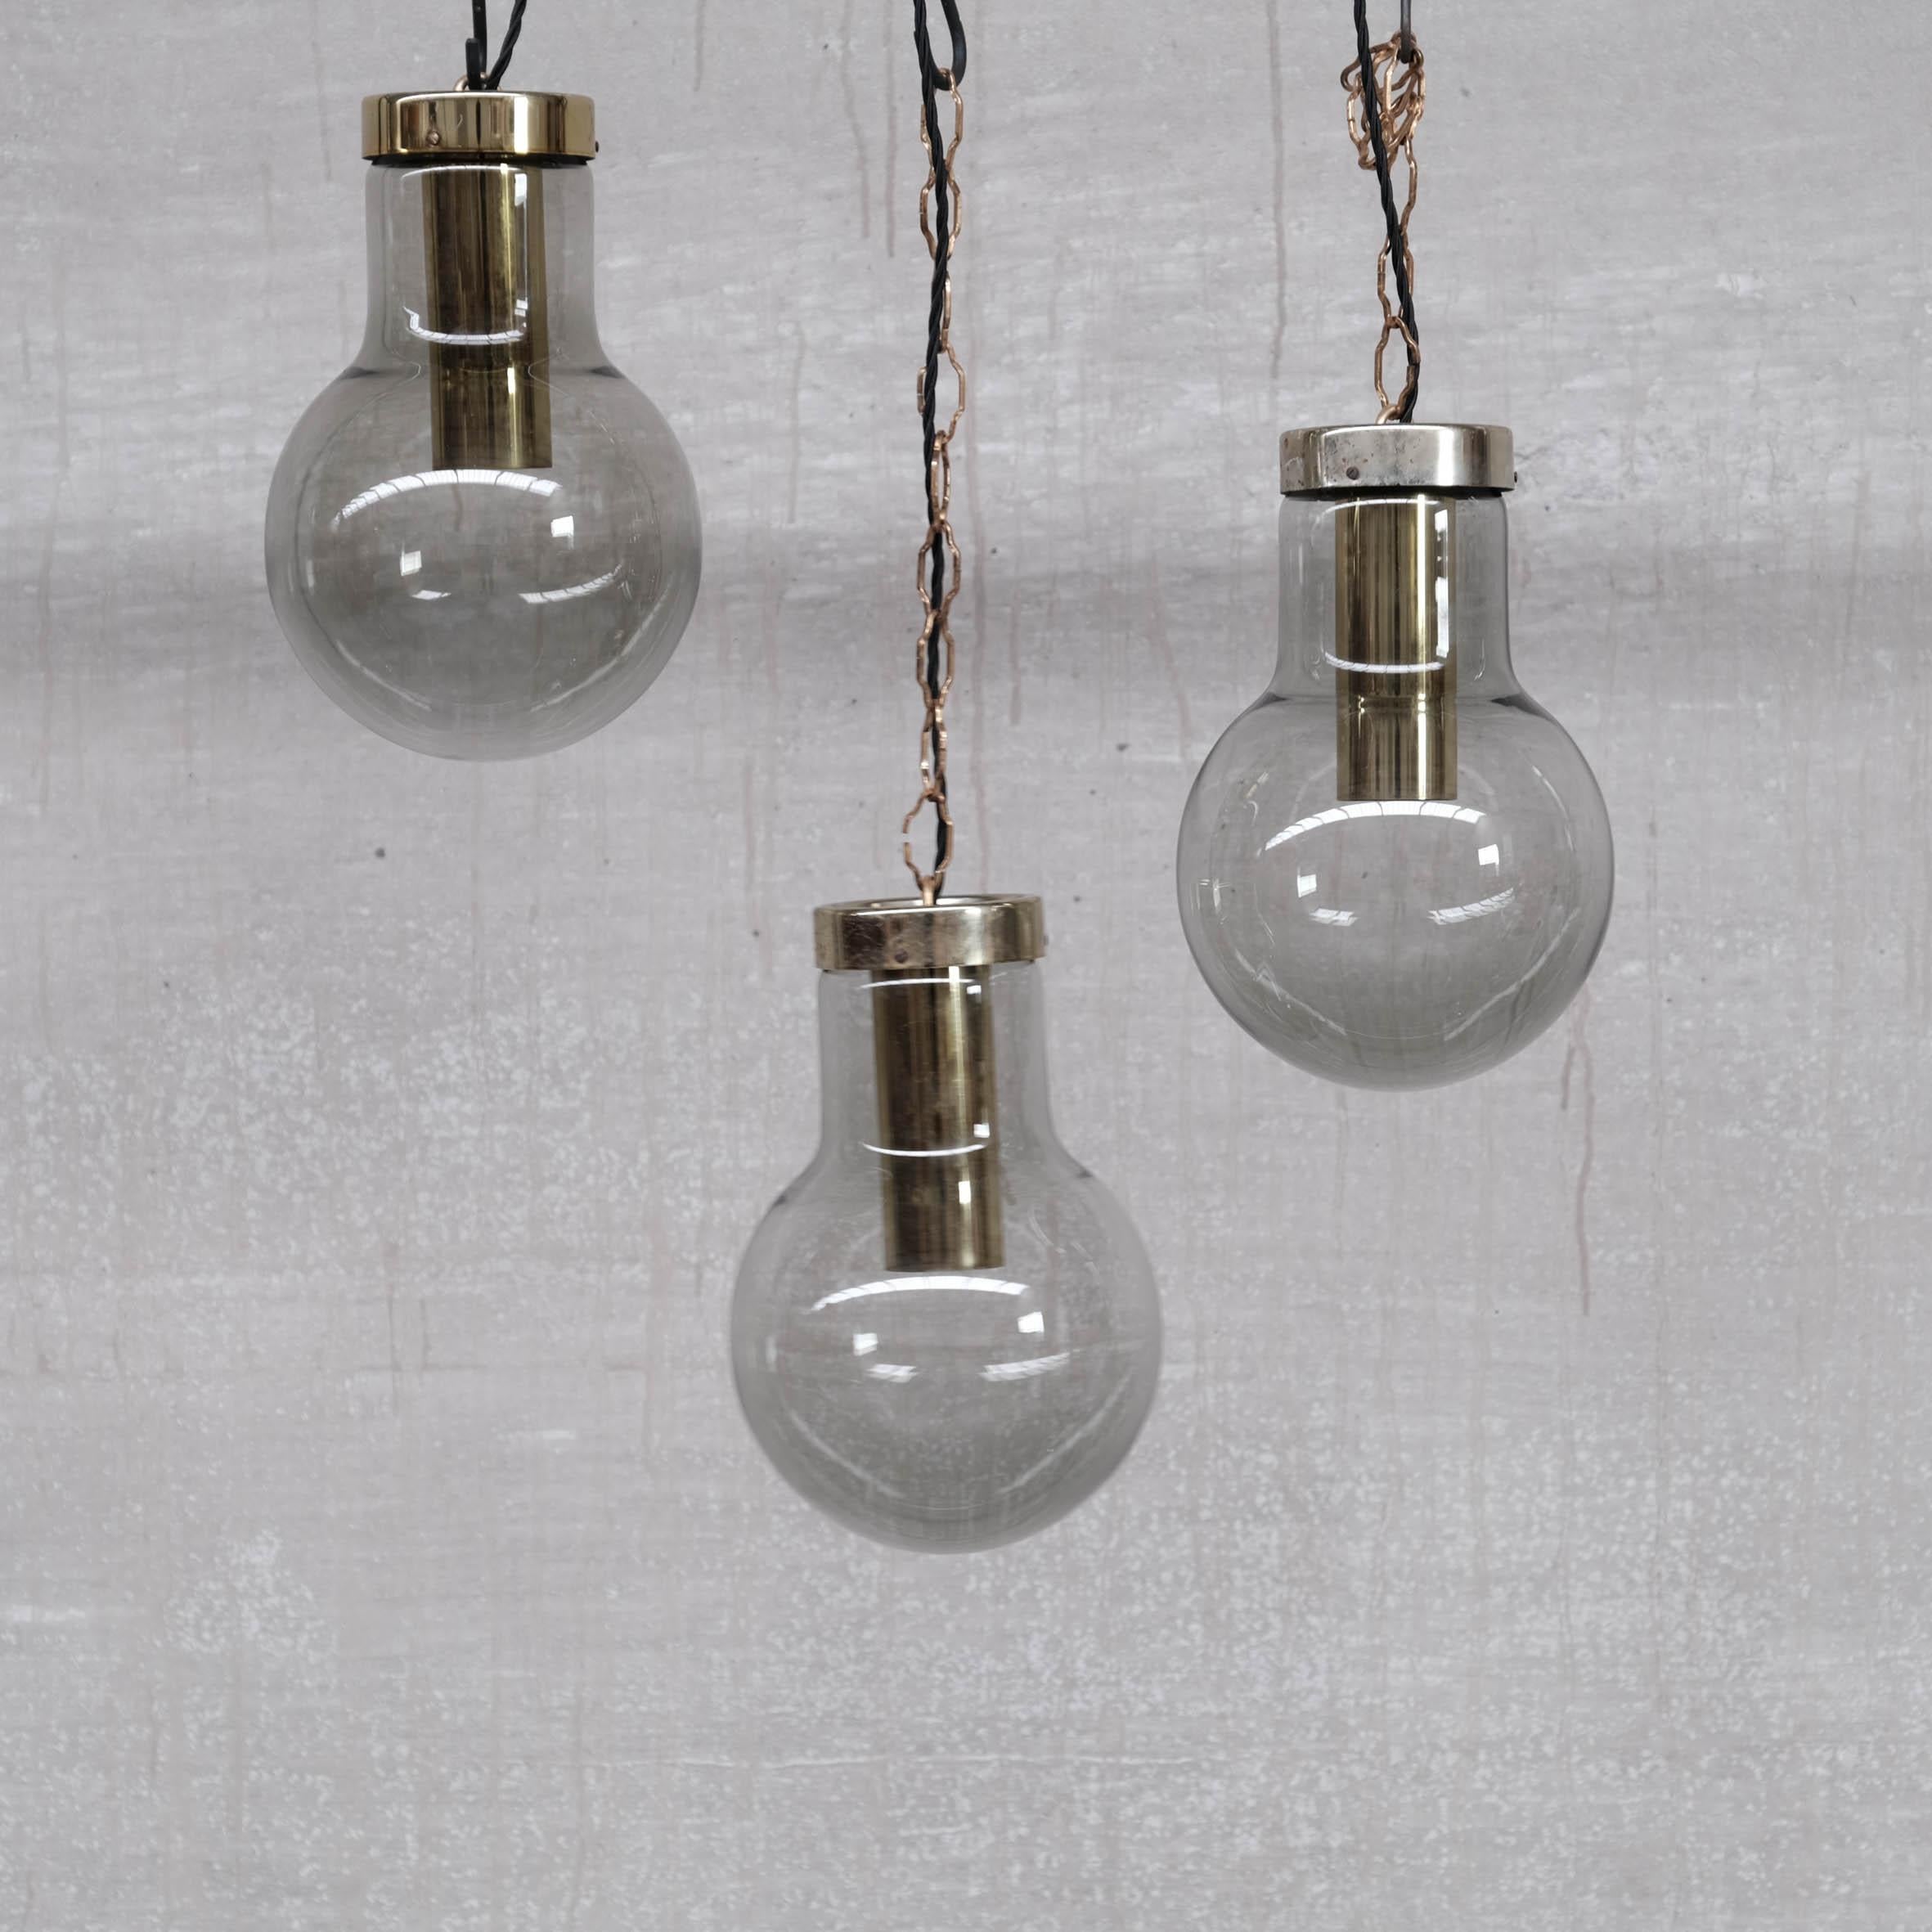 Smoked Midcentury Glass and Brass Pendant Lights by RAAK, '6 Available' For Sale 4